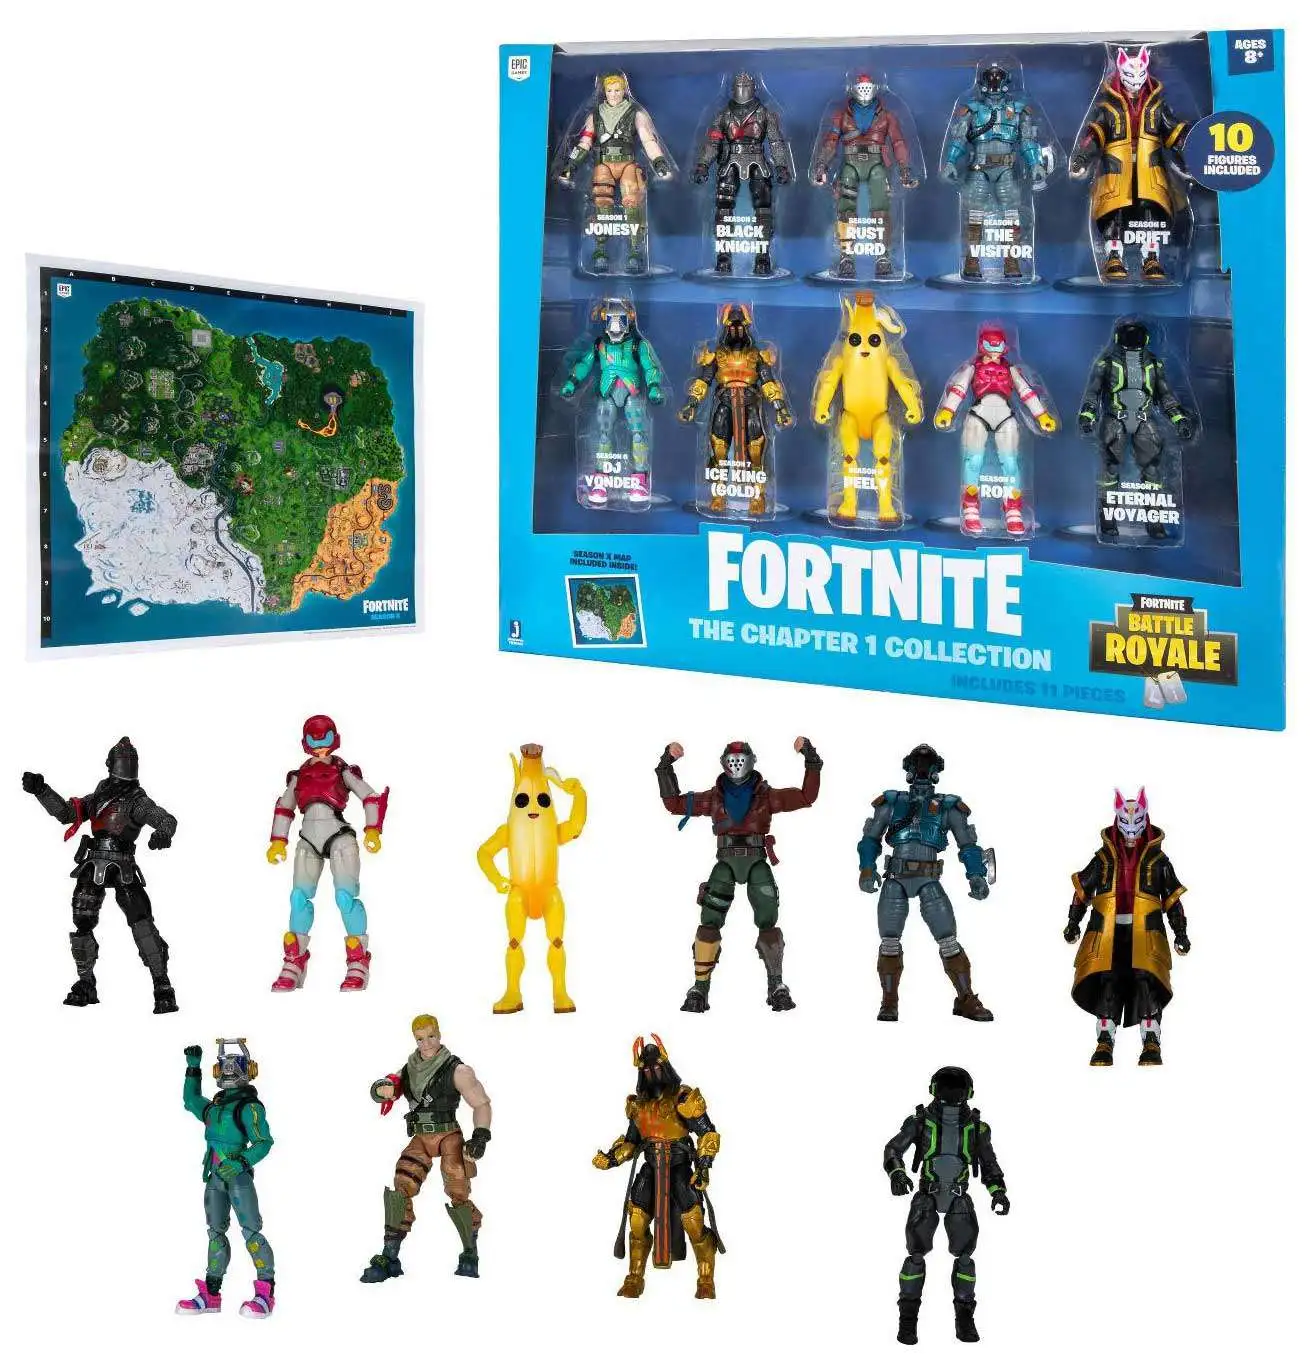 SEALED EXTREMELY RARE Fortnite Legendary Series 1 Figure Pack RAVEN 8 Pieces 